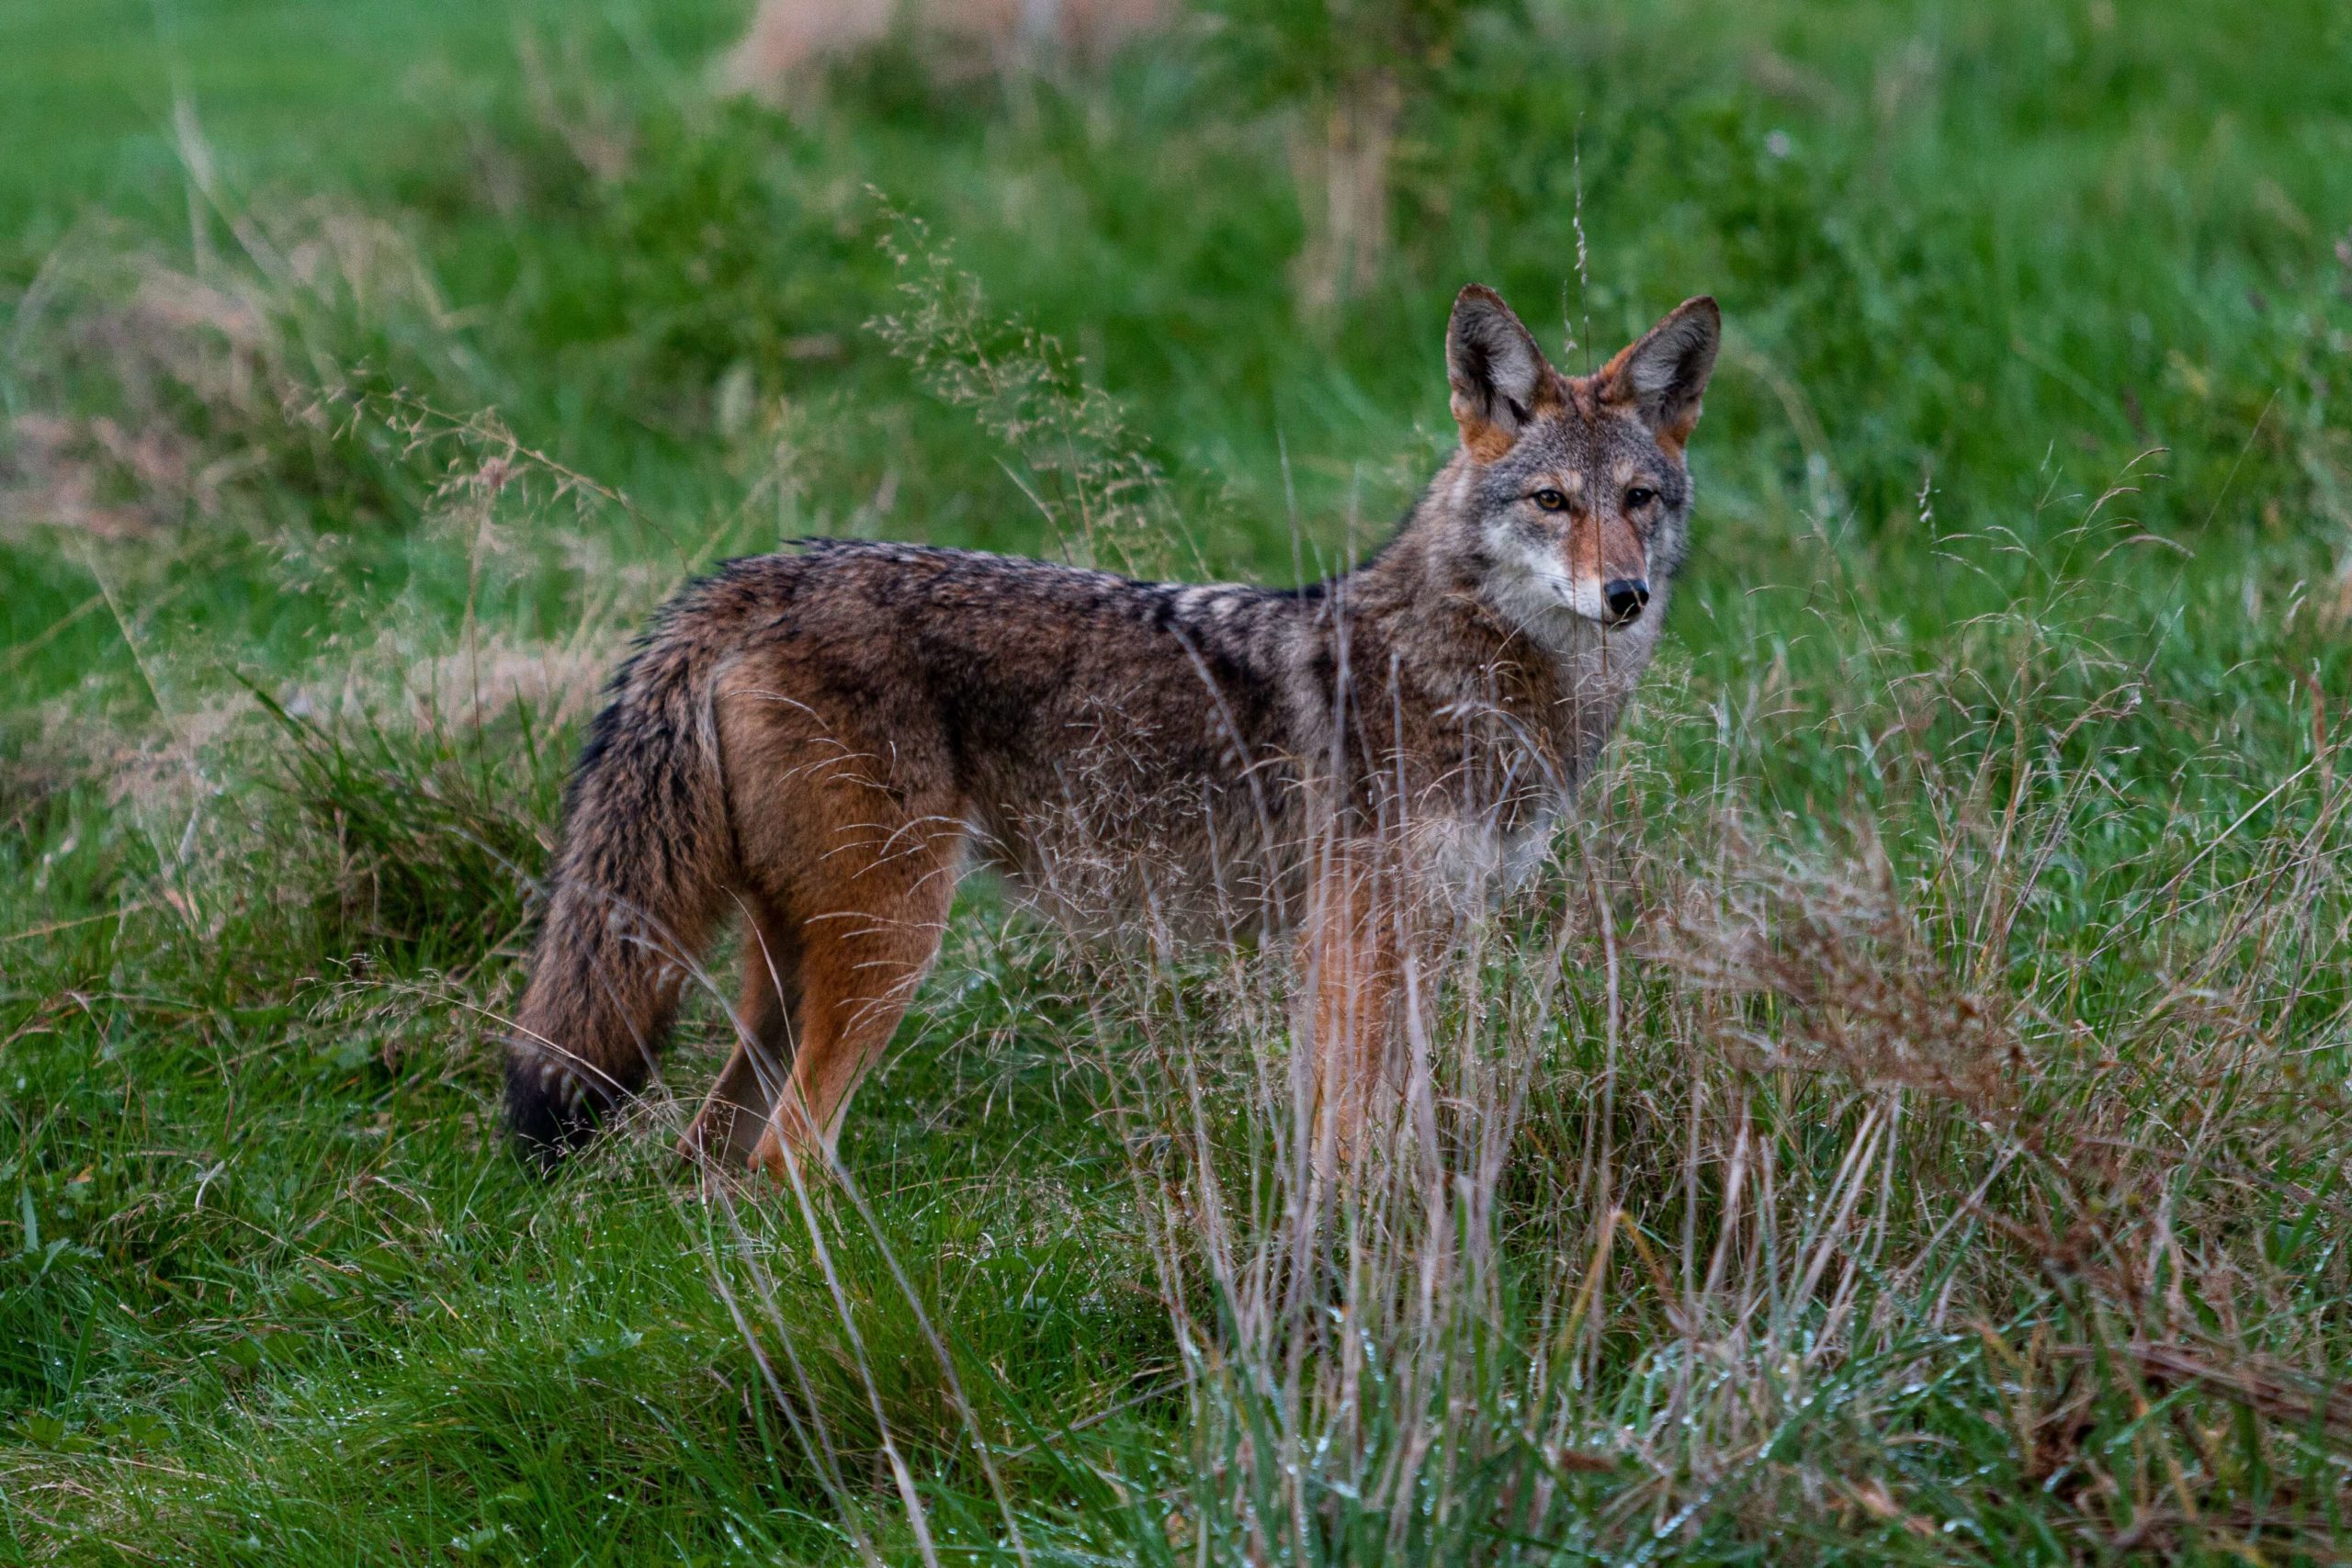 A picture of a coyote - what does their poop look like?